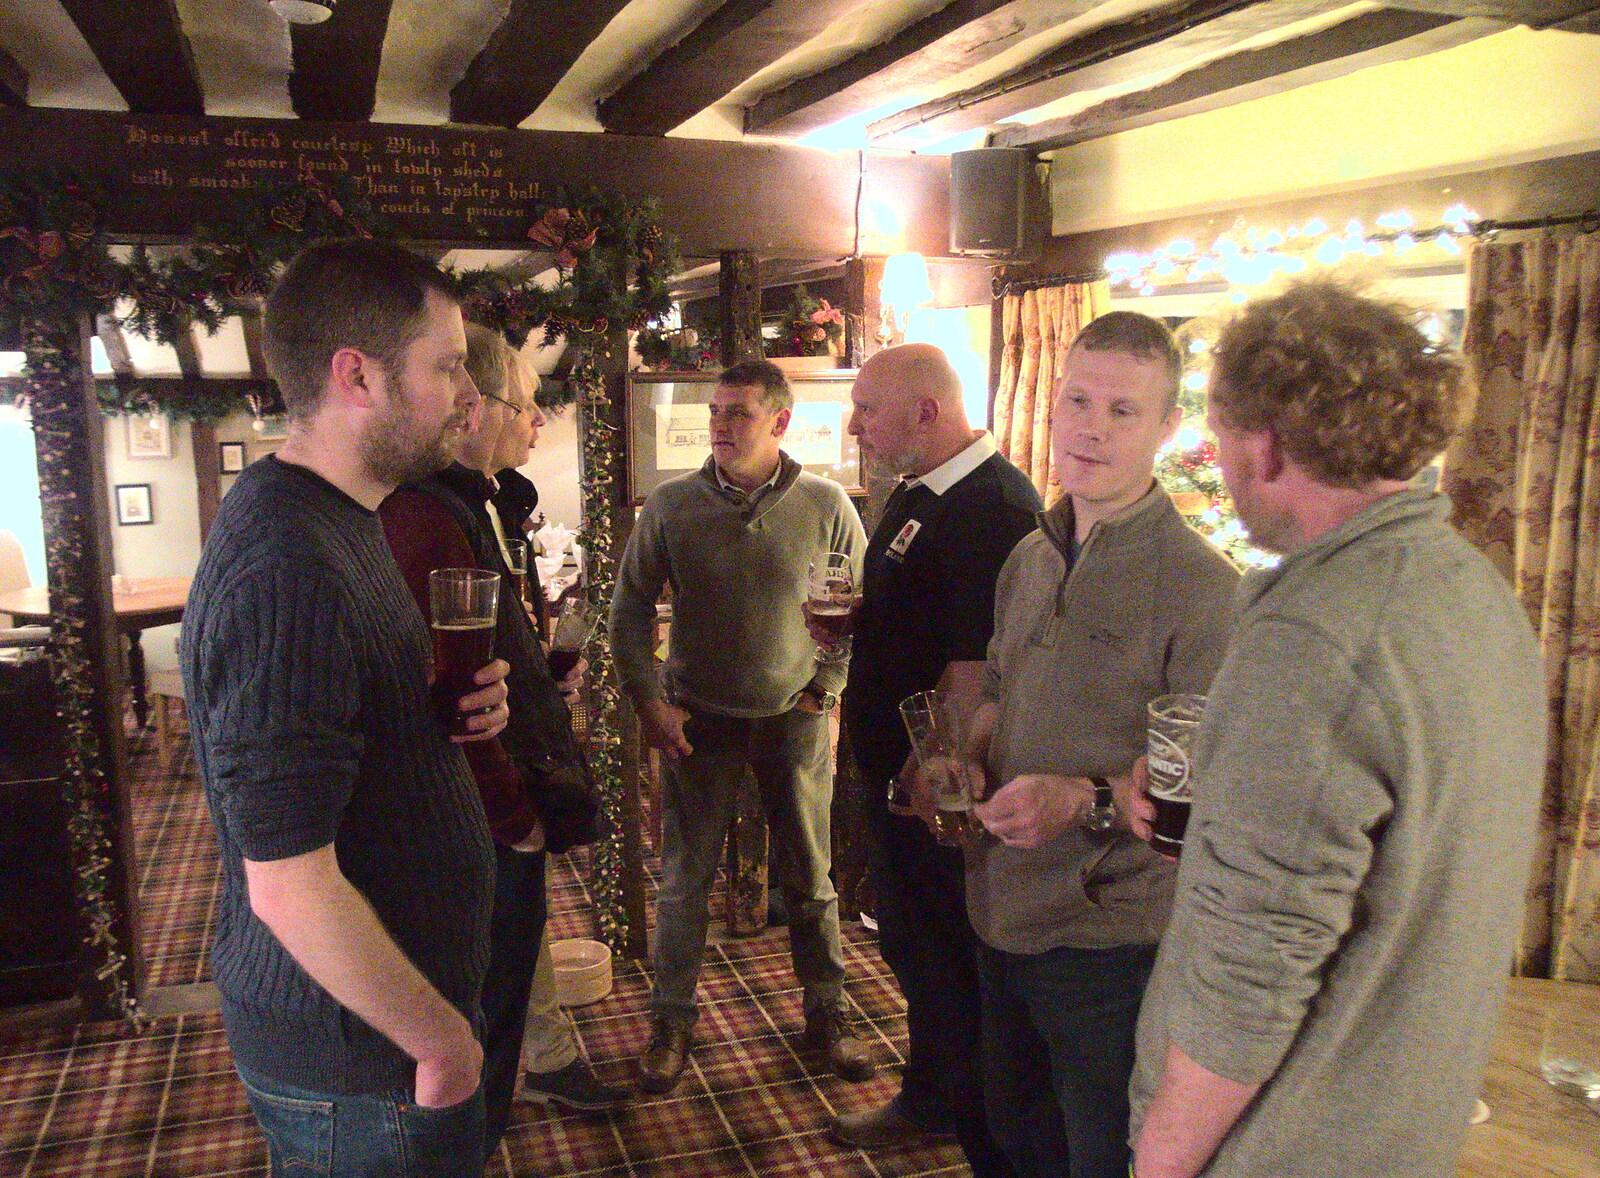 The lads in the Trowel and Hammer, Cotton from A Pub Crawl and Christmas Lights, Thornham, Cotton, Bacton and Eye, Suffolk - 7th December 2018